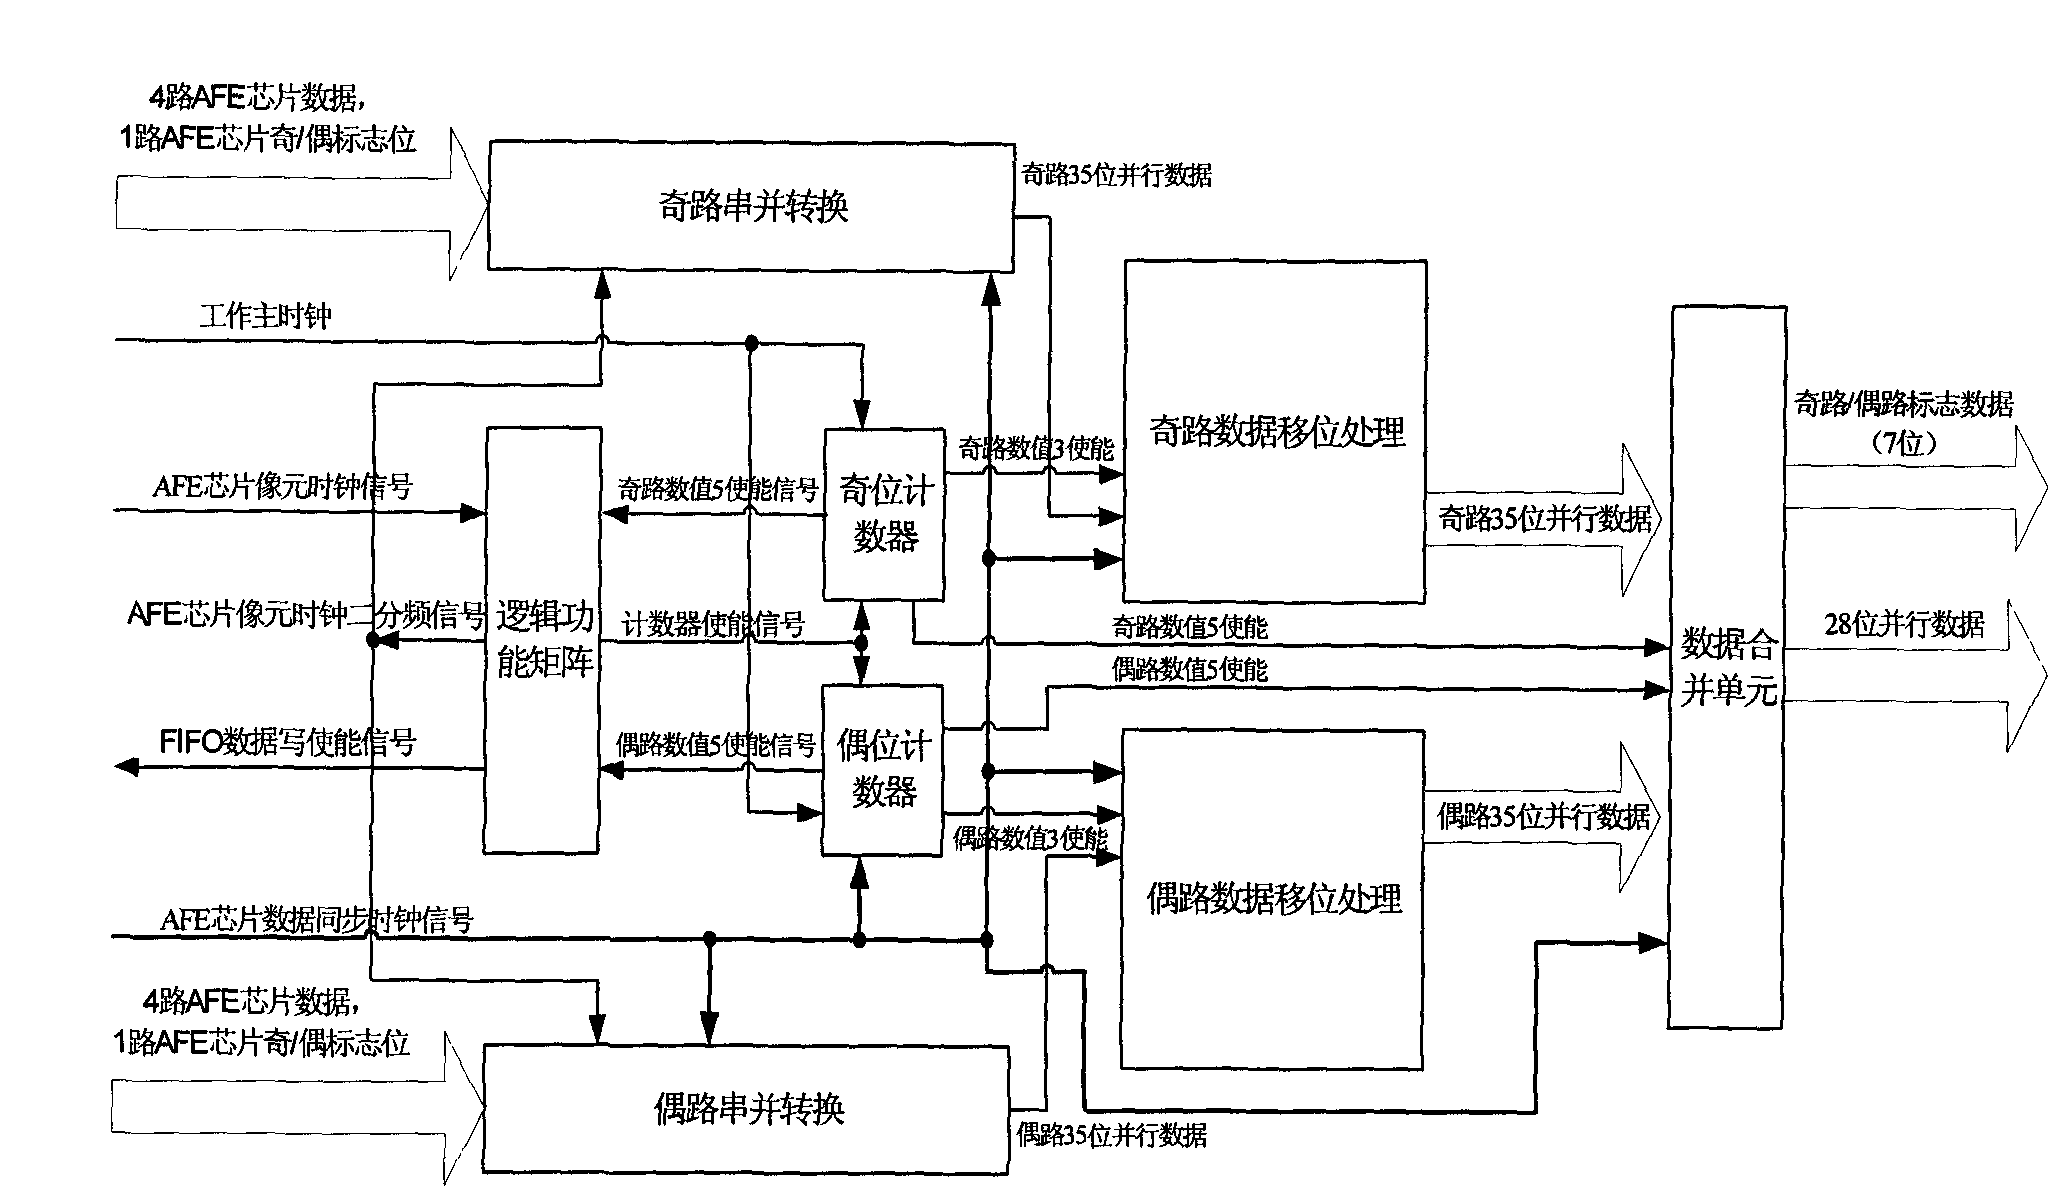 Data receiving and processing system of analog front end